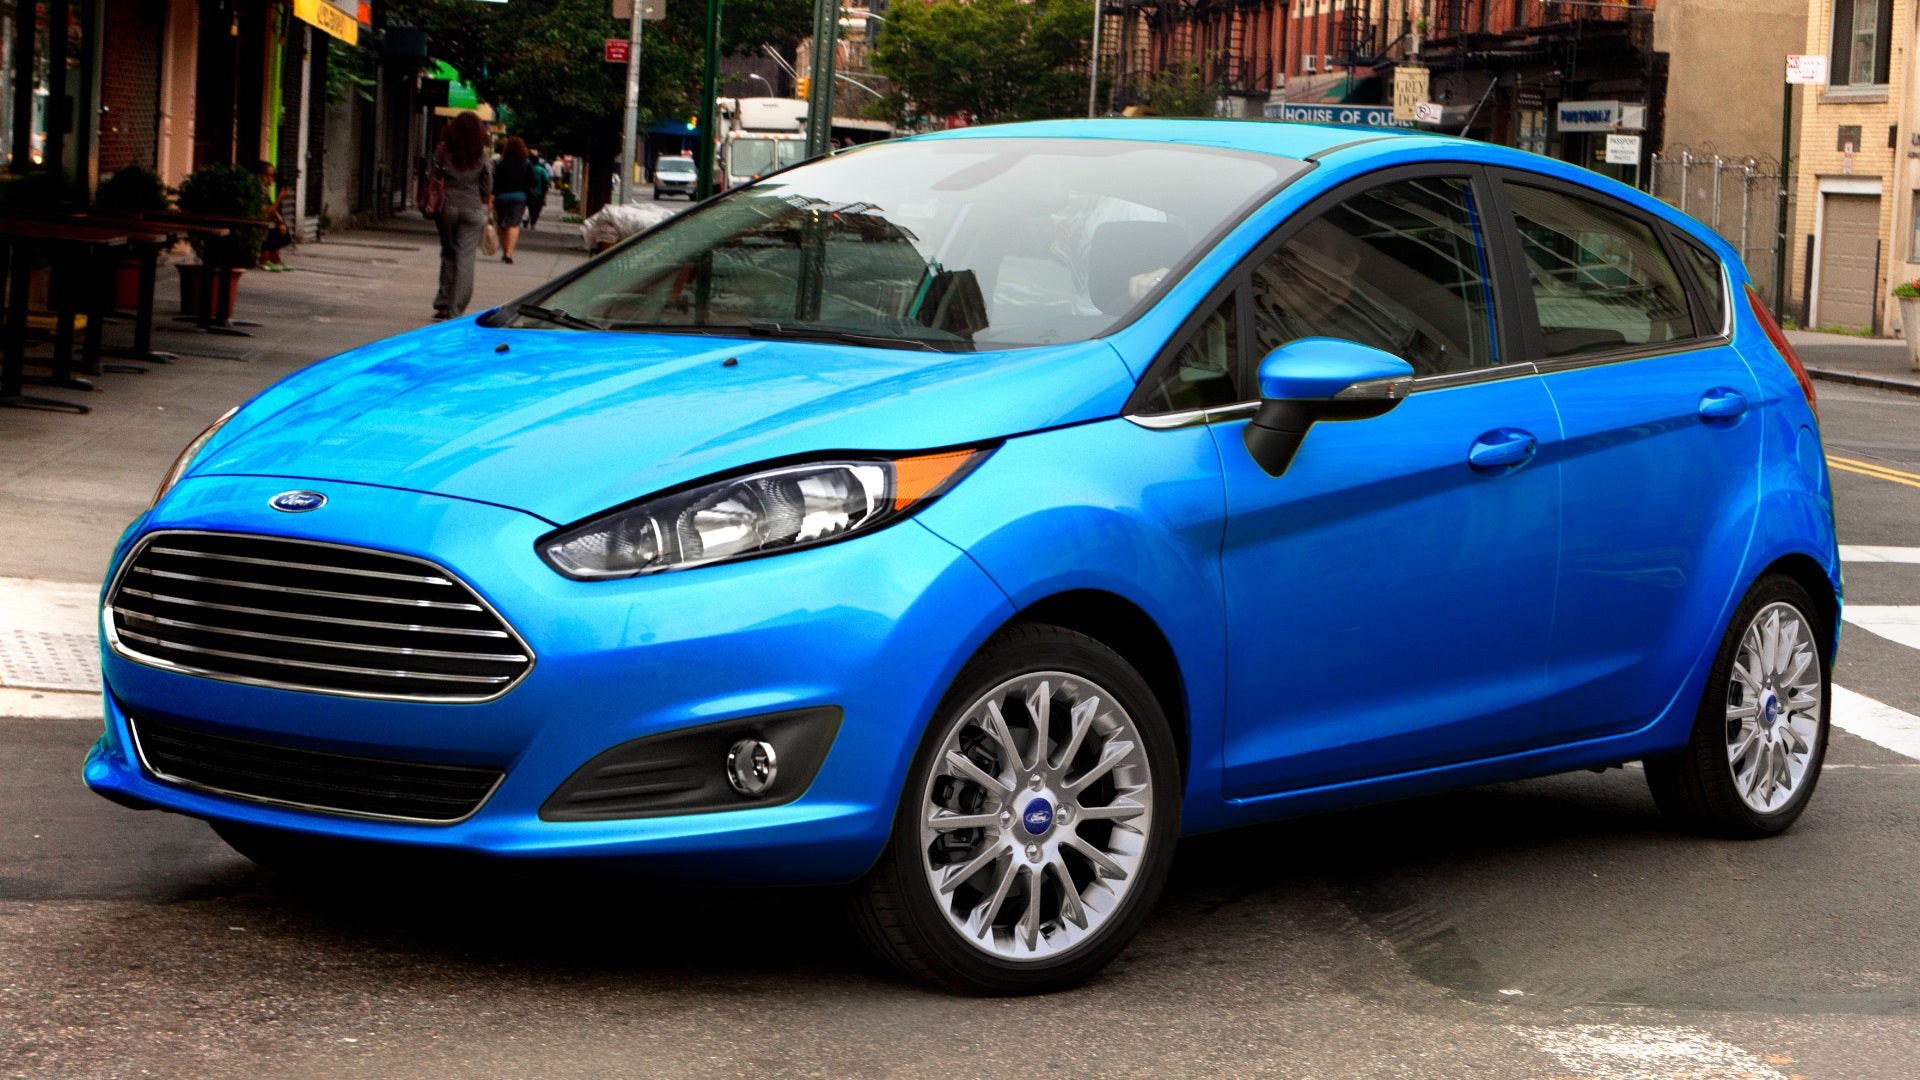 Ford’s Getting Sued Over PowerShift Transmissions Again